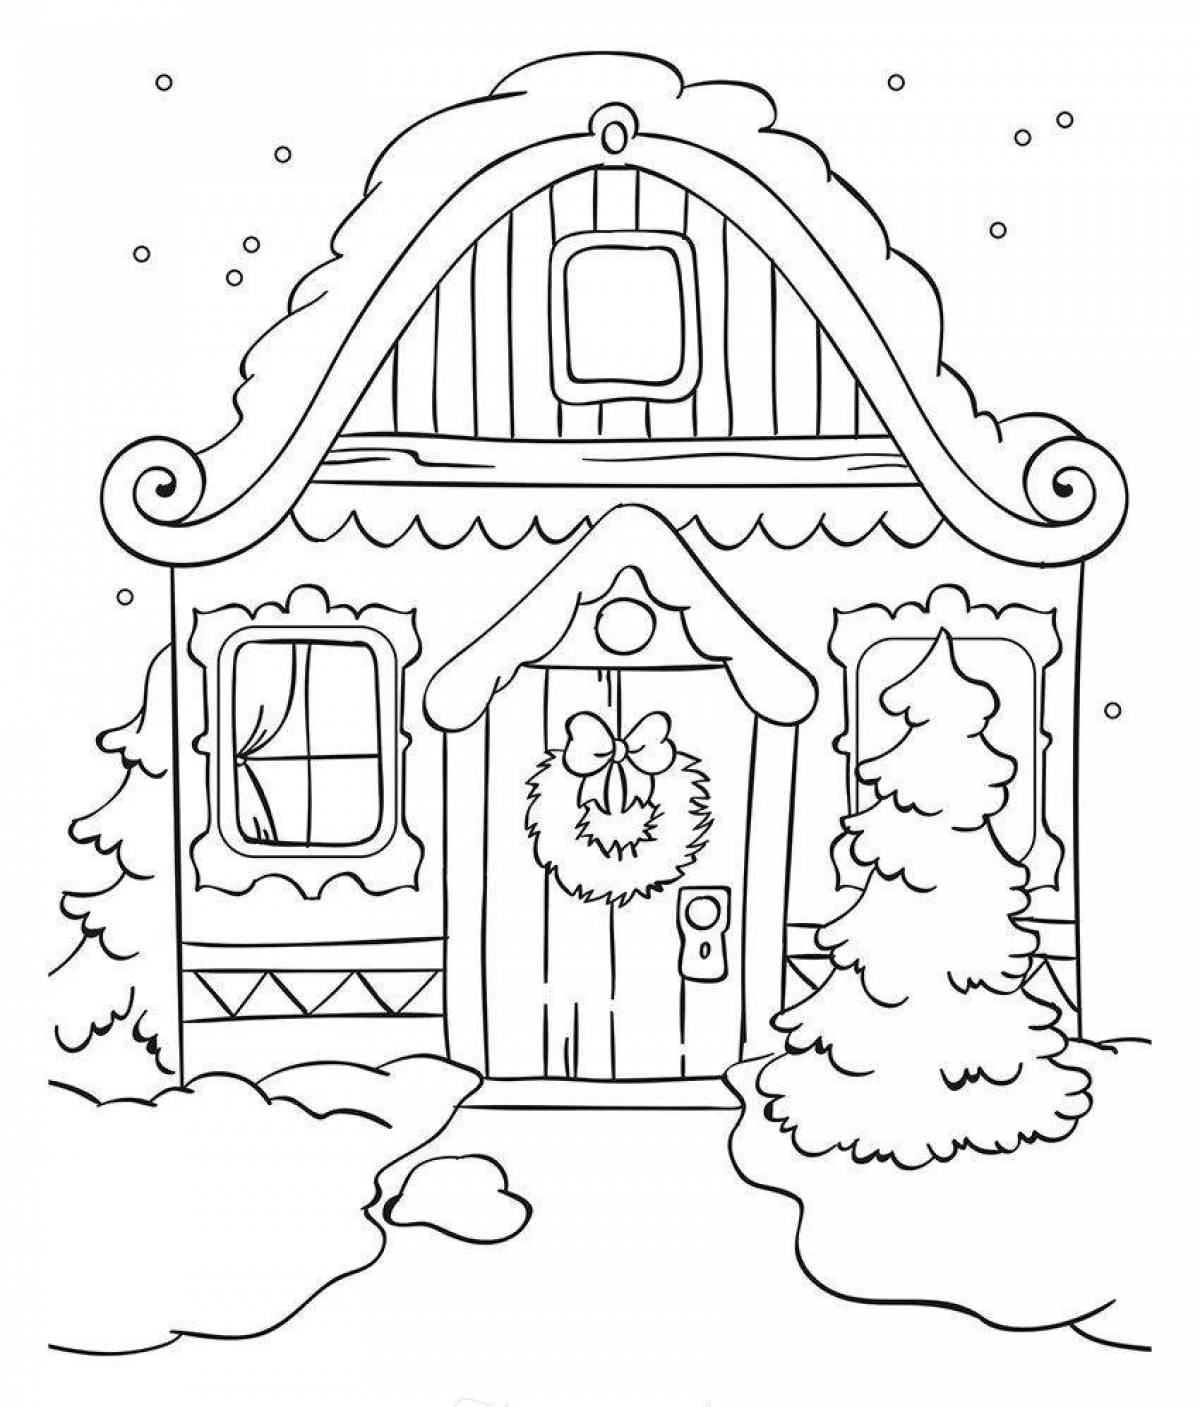 Playful winter house coloring page for kids